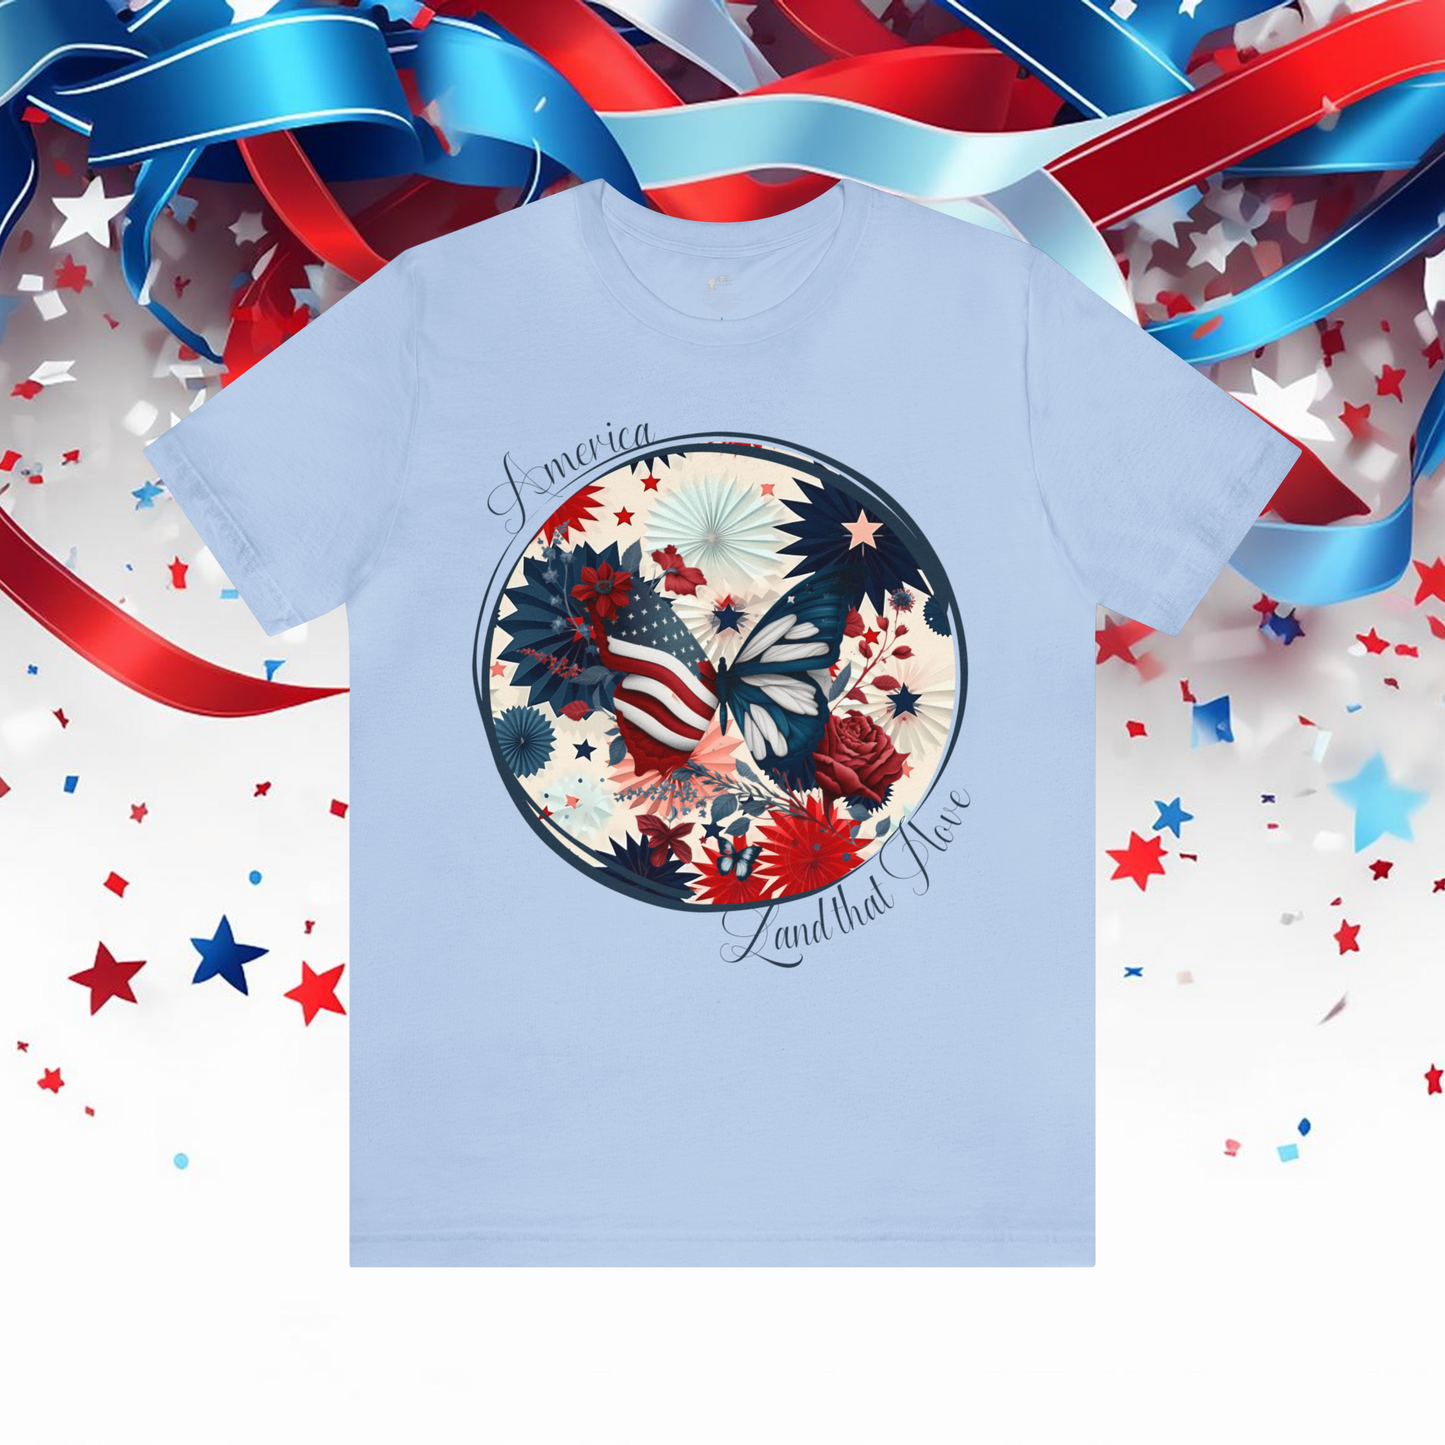 Women’s Patriotic Shirt I Love America Shirt Floral Butterfly Fourth of July Shirt Inspiring Tshirt for Independence Day Top Freedom Shirt